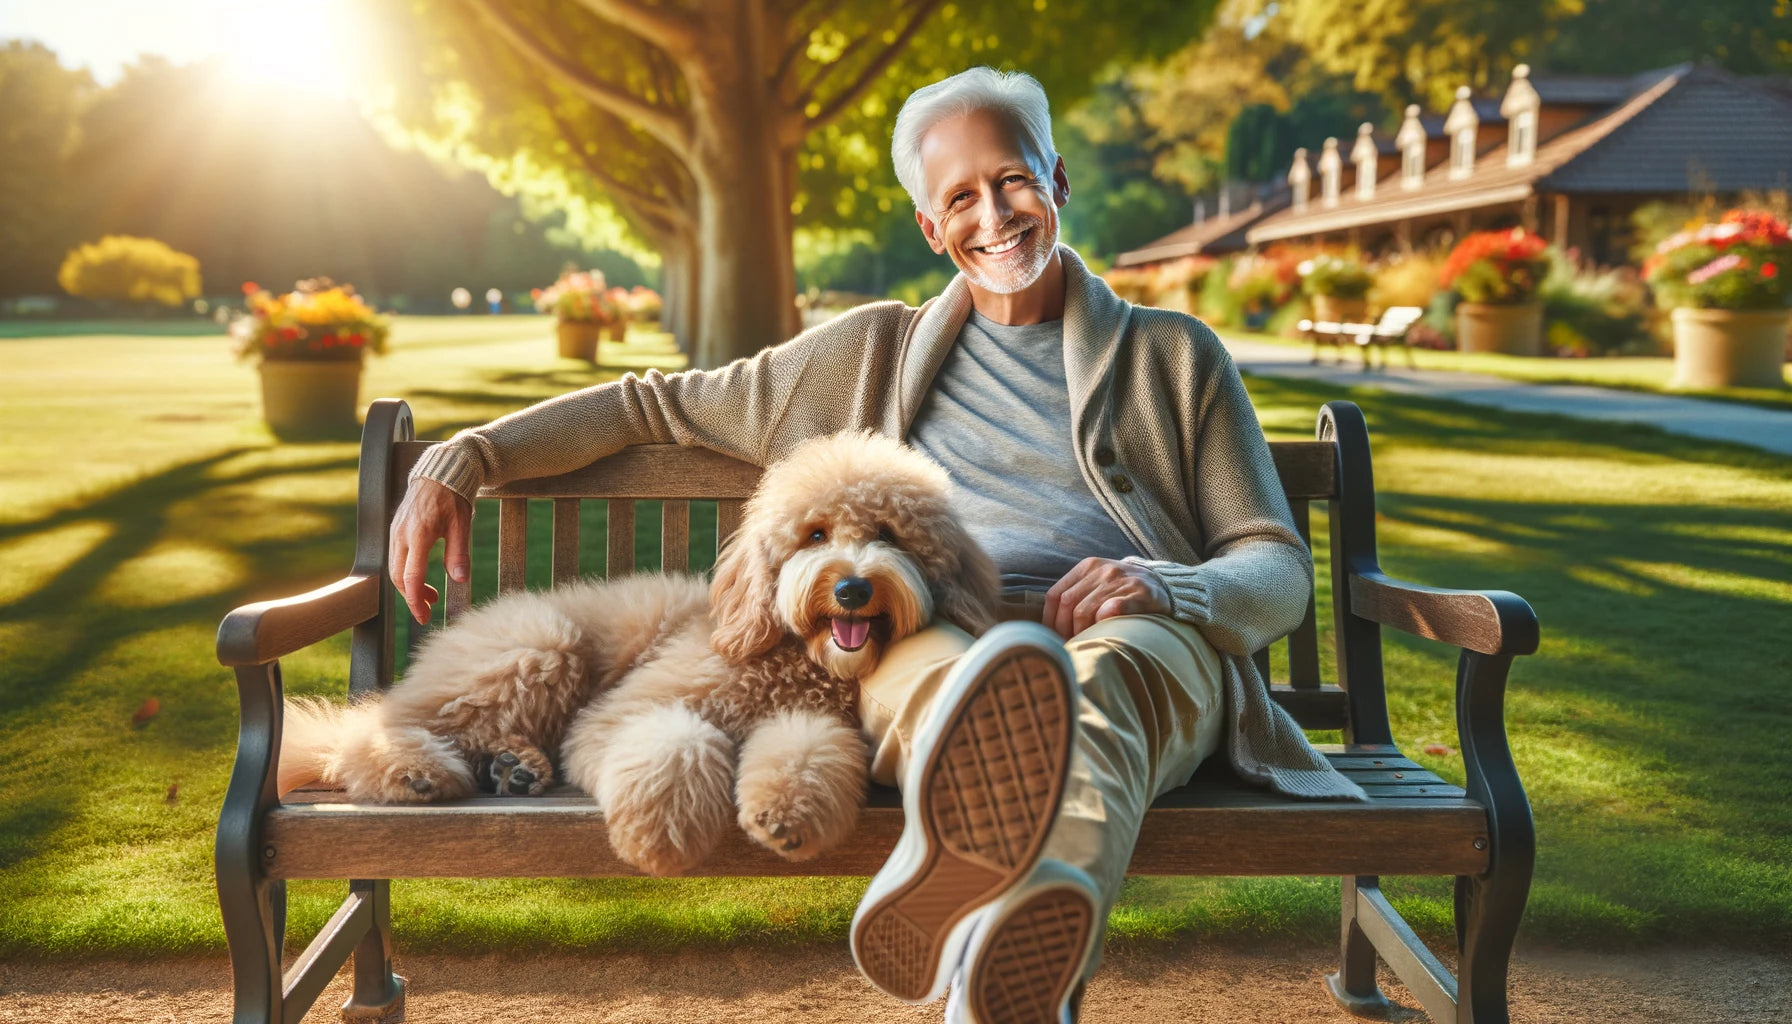 Cozy scene with a smiling Baby Boomer relaxing on a park bench on a sunny day with a fluffy Mini Goldendoodle curled up beside them.